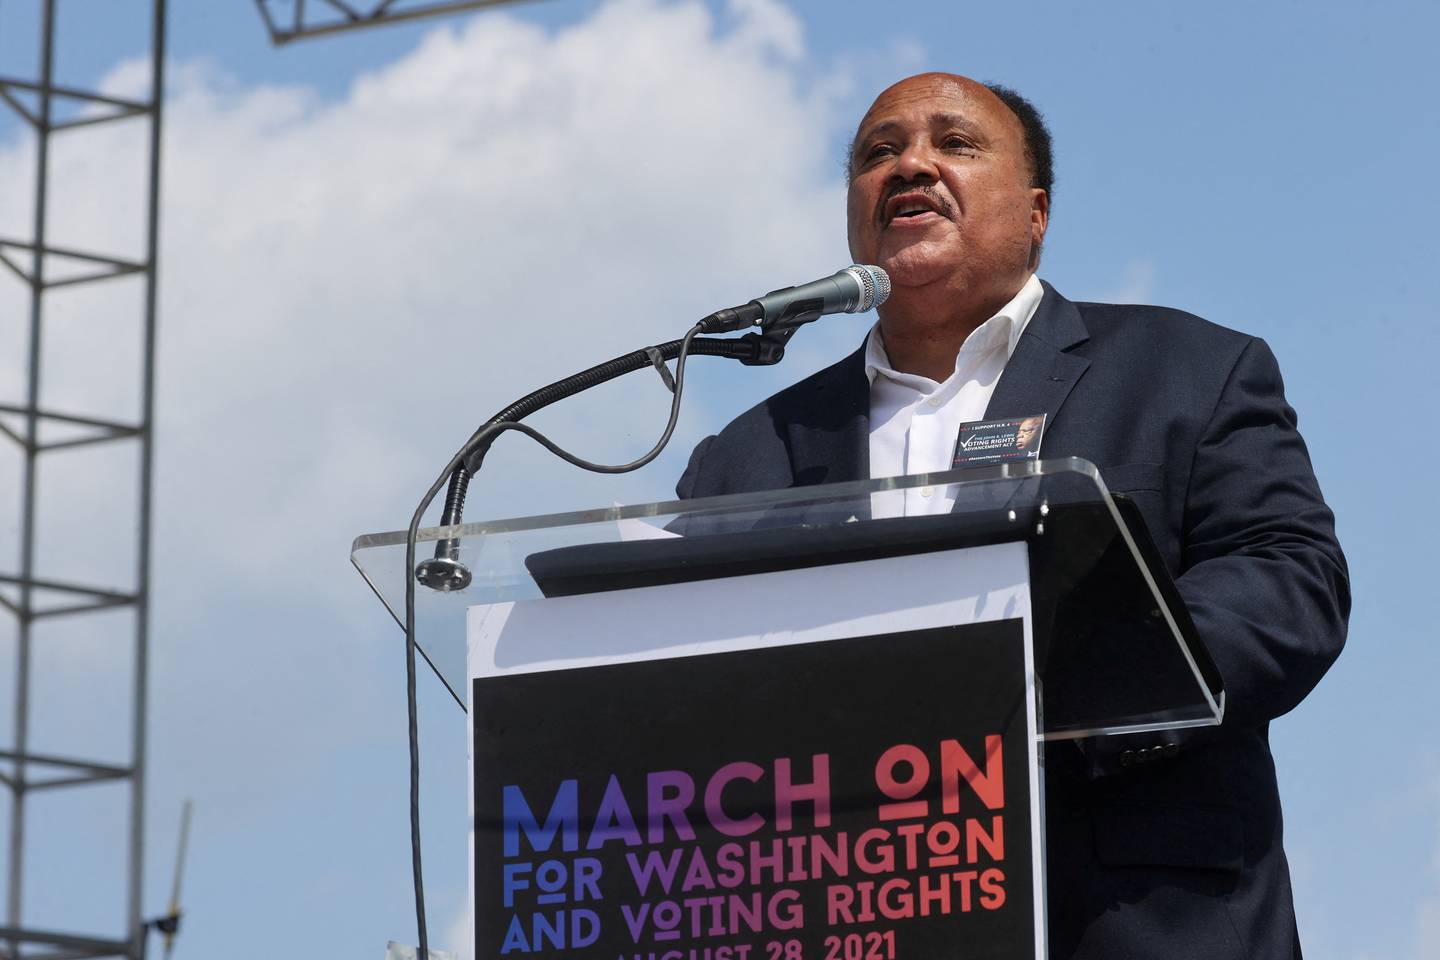 Martin Luther King III delivers remarks at the 'March On For Voting Rights' rally in Washington last August. Reuters